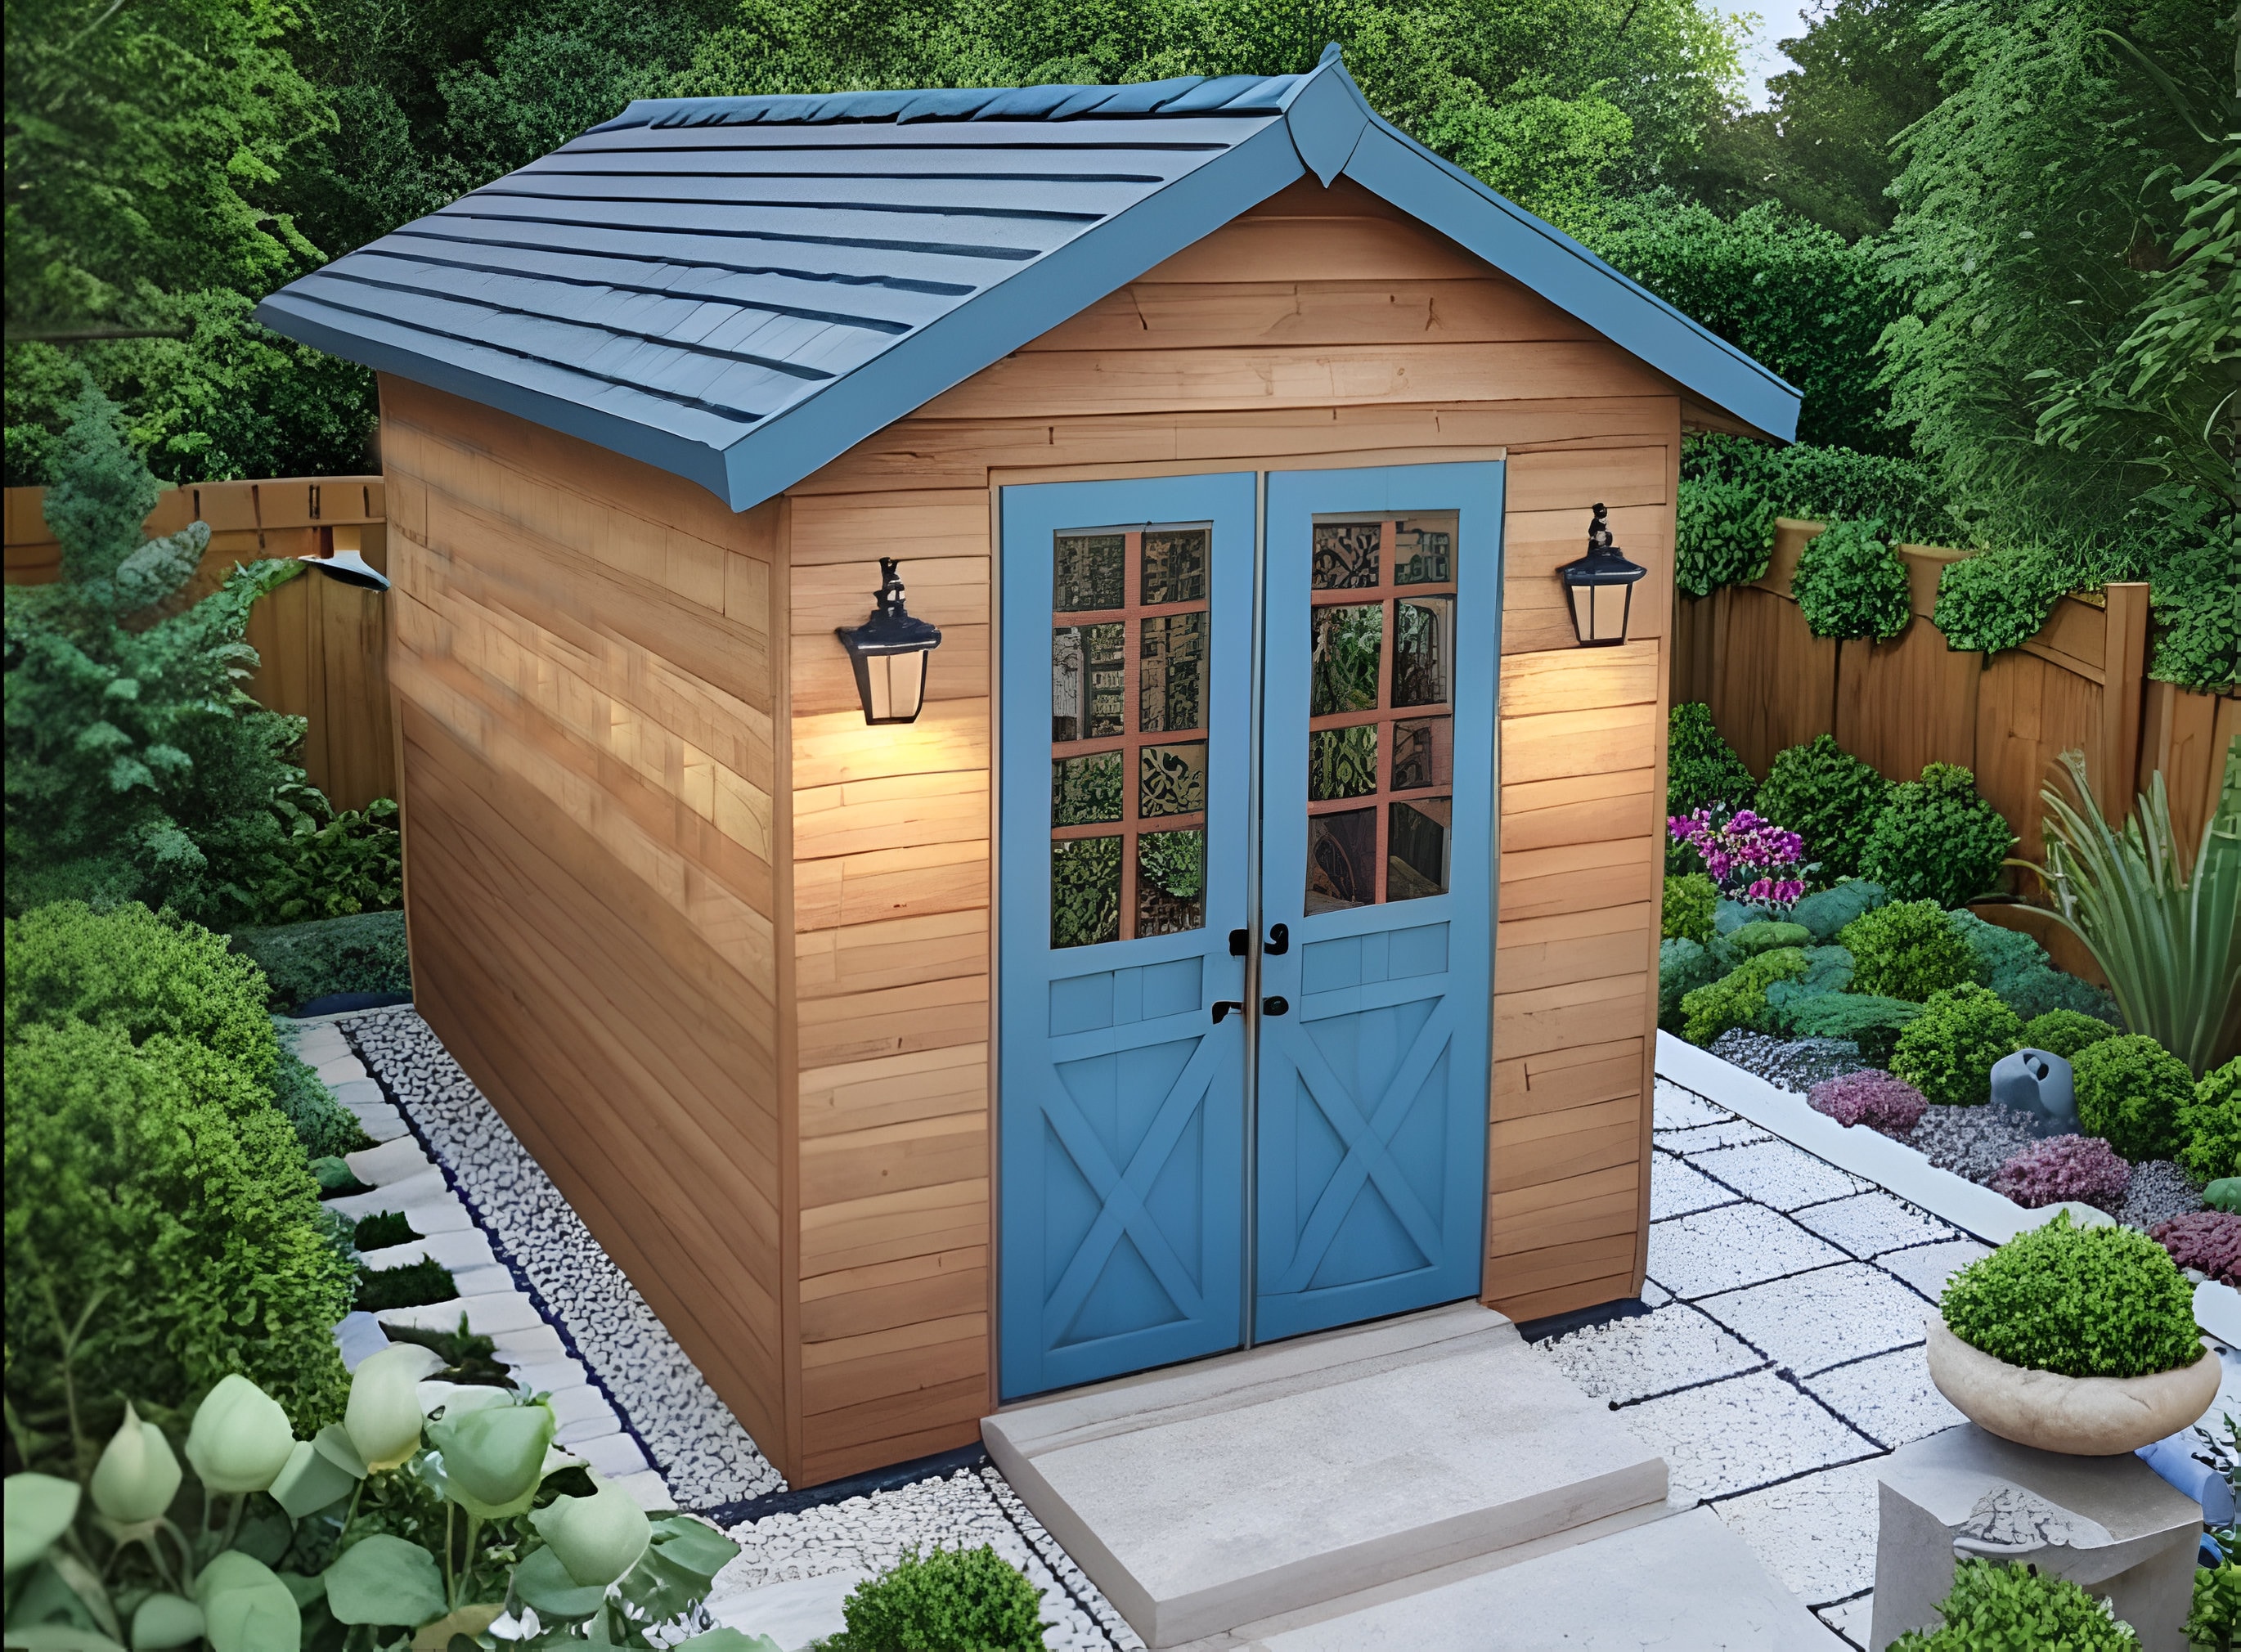 Modern Shed Plans Backyard Shed Diy 12x8 Shed Plan Outdoor - Etsy